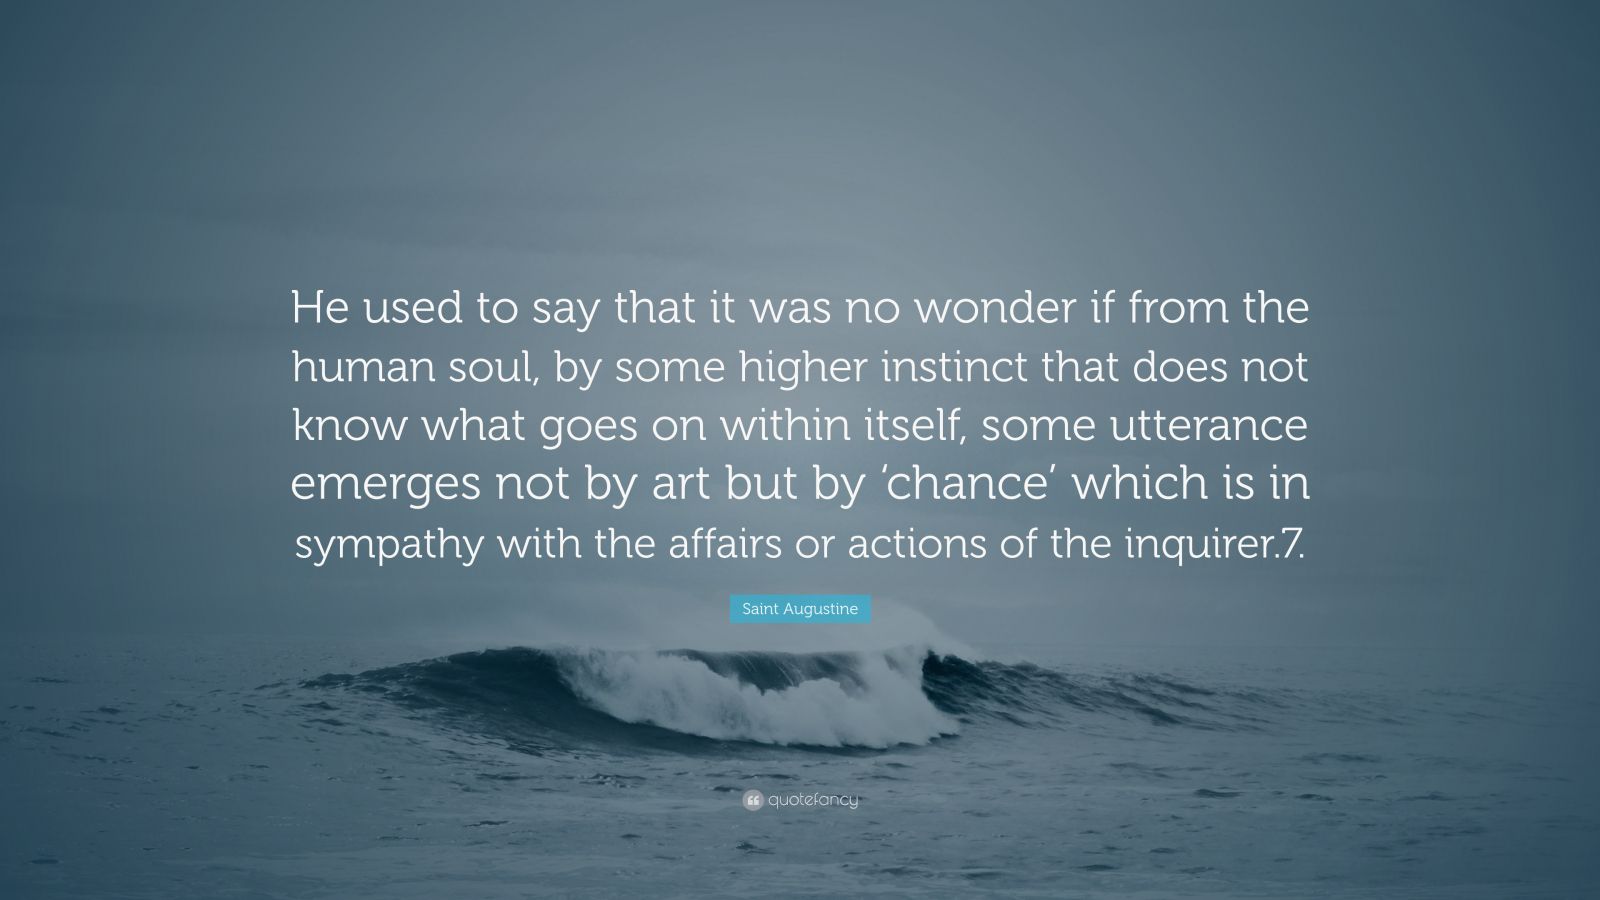 Saint Augustine Quote: “He used to say that it was no wonder if from ...